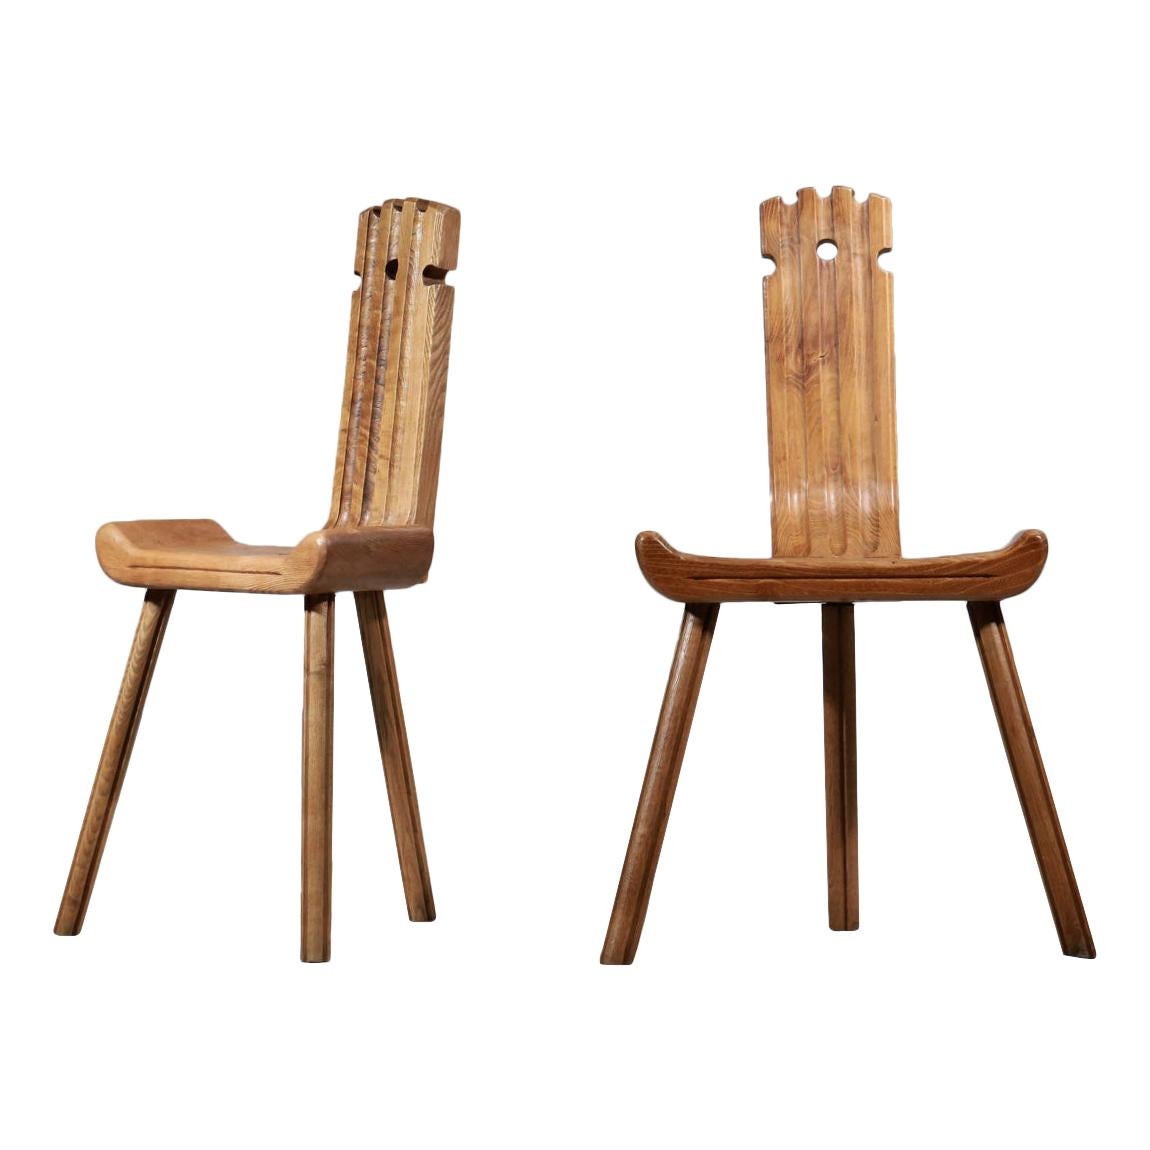 French Tripod Chairs from the 1960s Oak Rustic Style of Charlotte Perriand, Pair